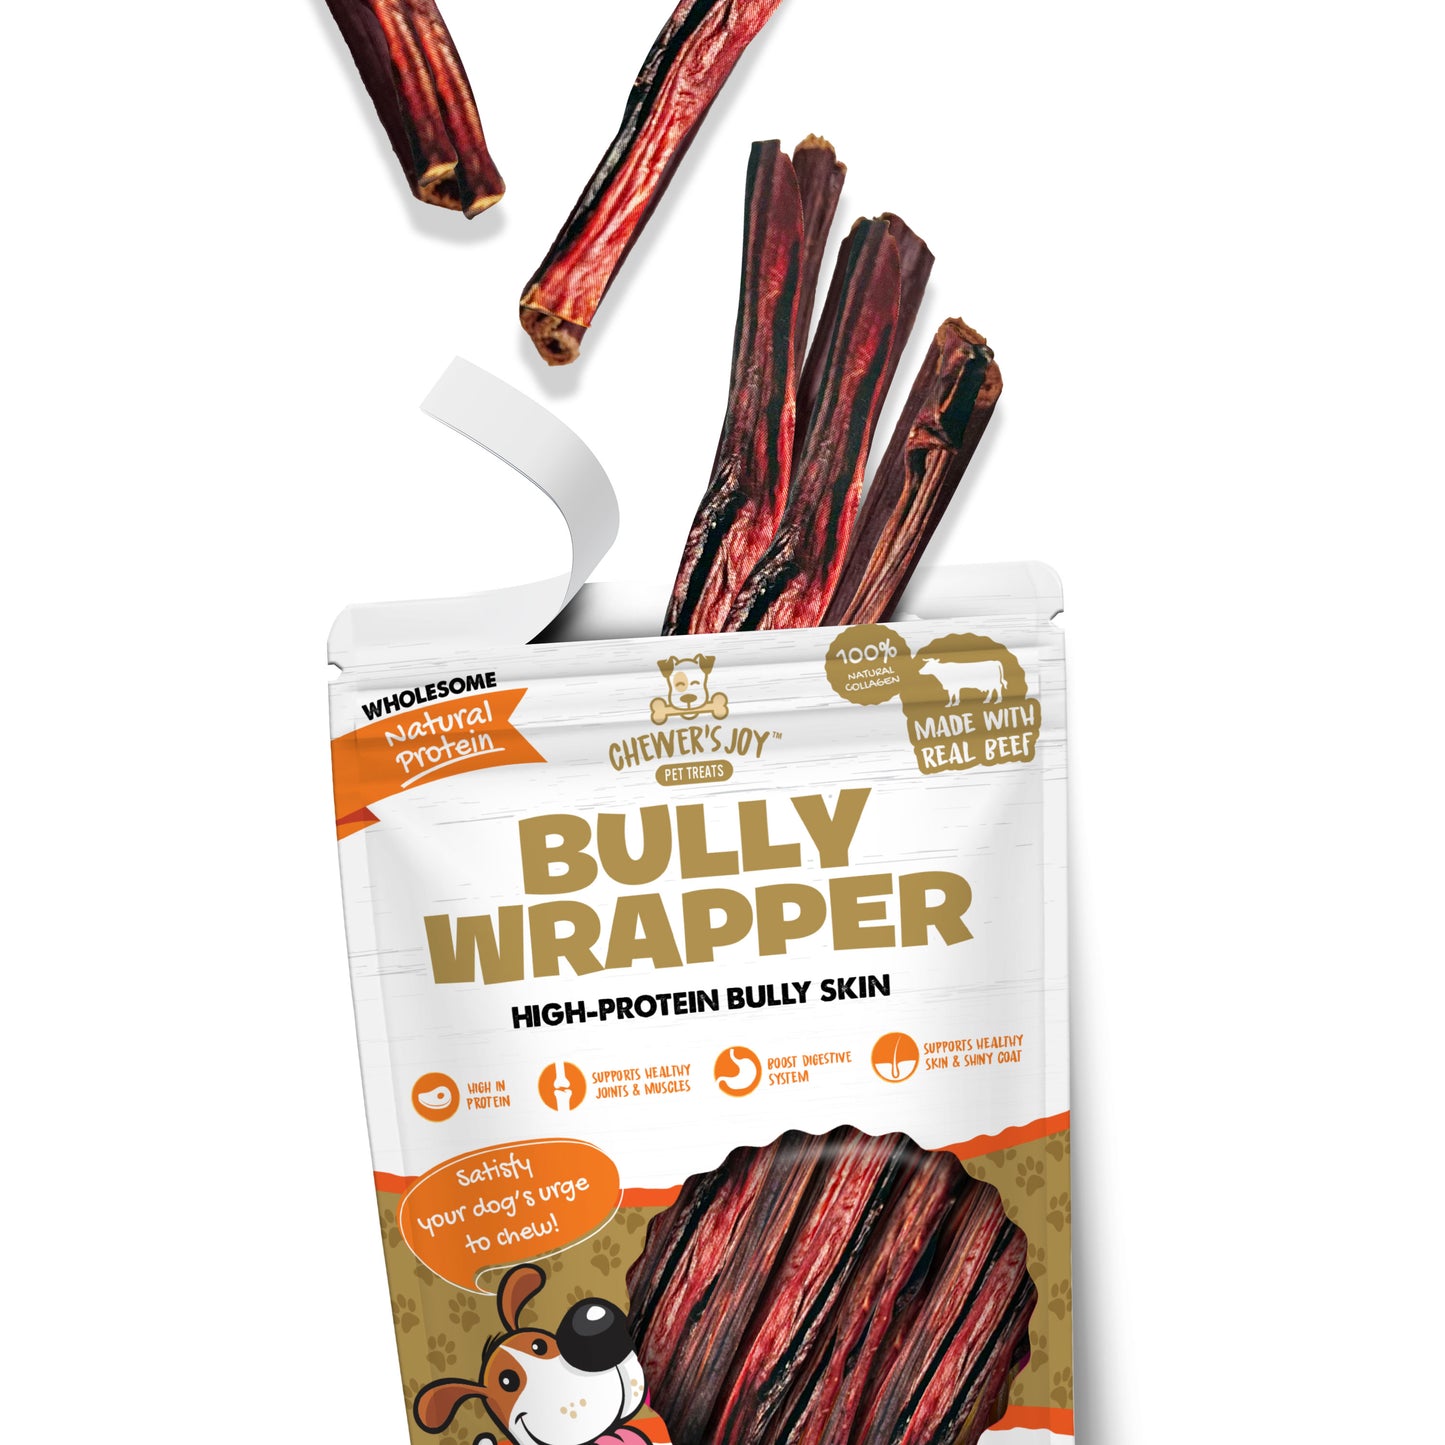 Chewer's Joy  Bully Wrapper, Bully Skin Sticks Dog Treats- 4oz, High in Protein, Promotes Healthy Joints, Bones, Boost Digestive System, Supports Healthy Skin and Shiny Coat..